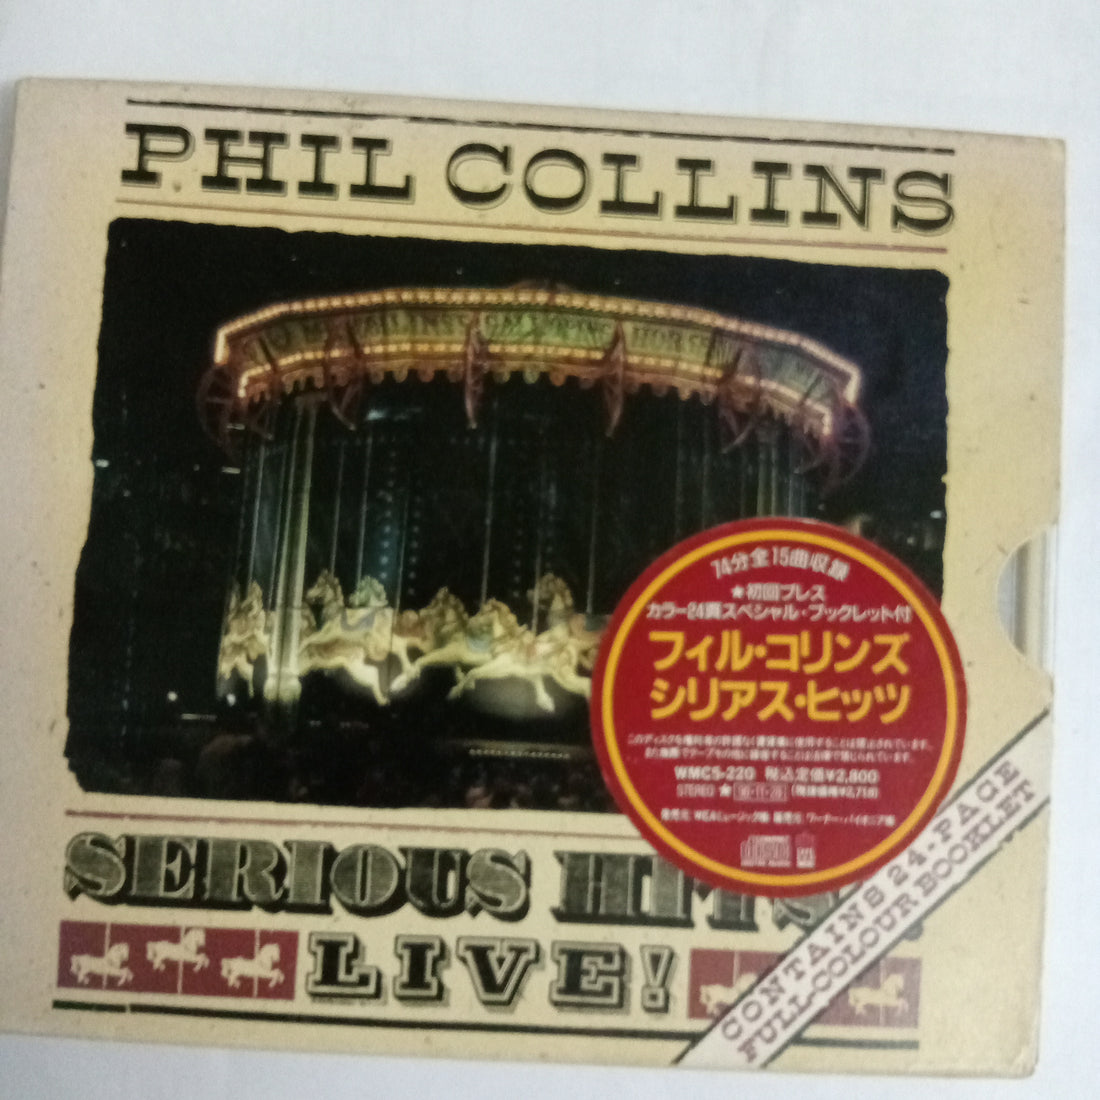 Phil Collins - Serious Hits...Live! (CD) (VG)